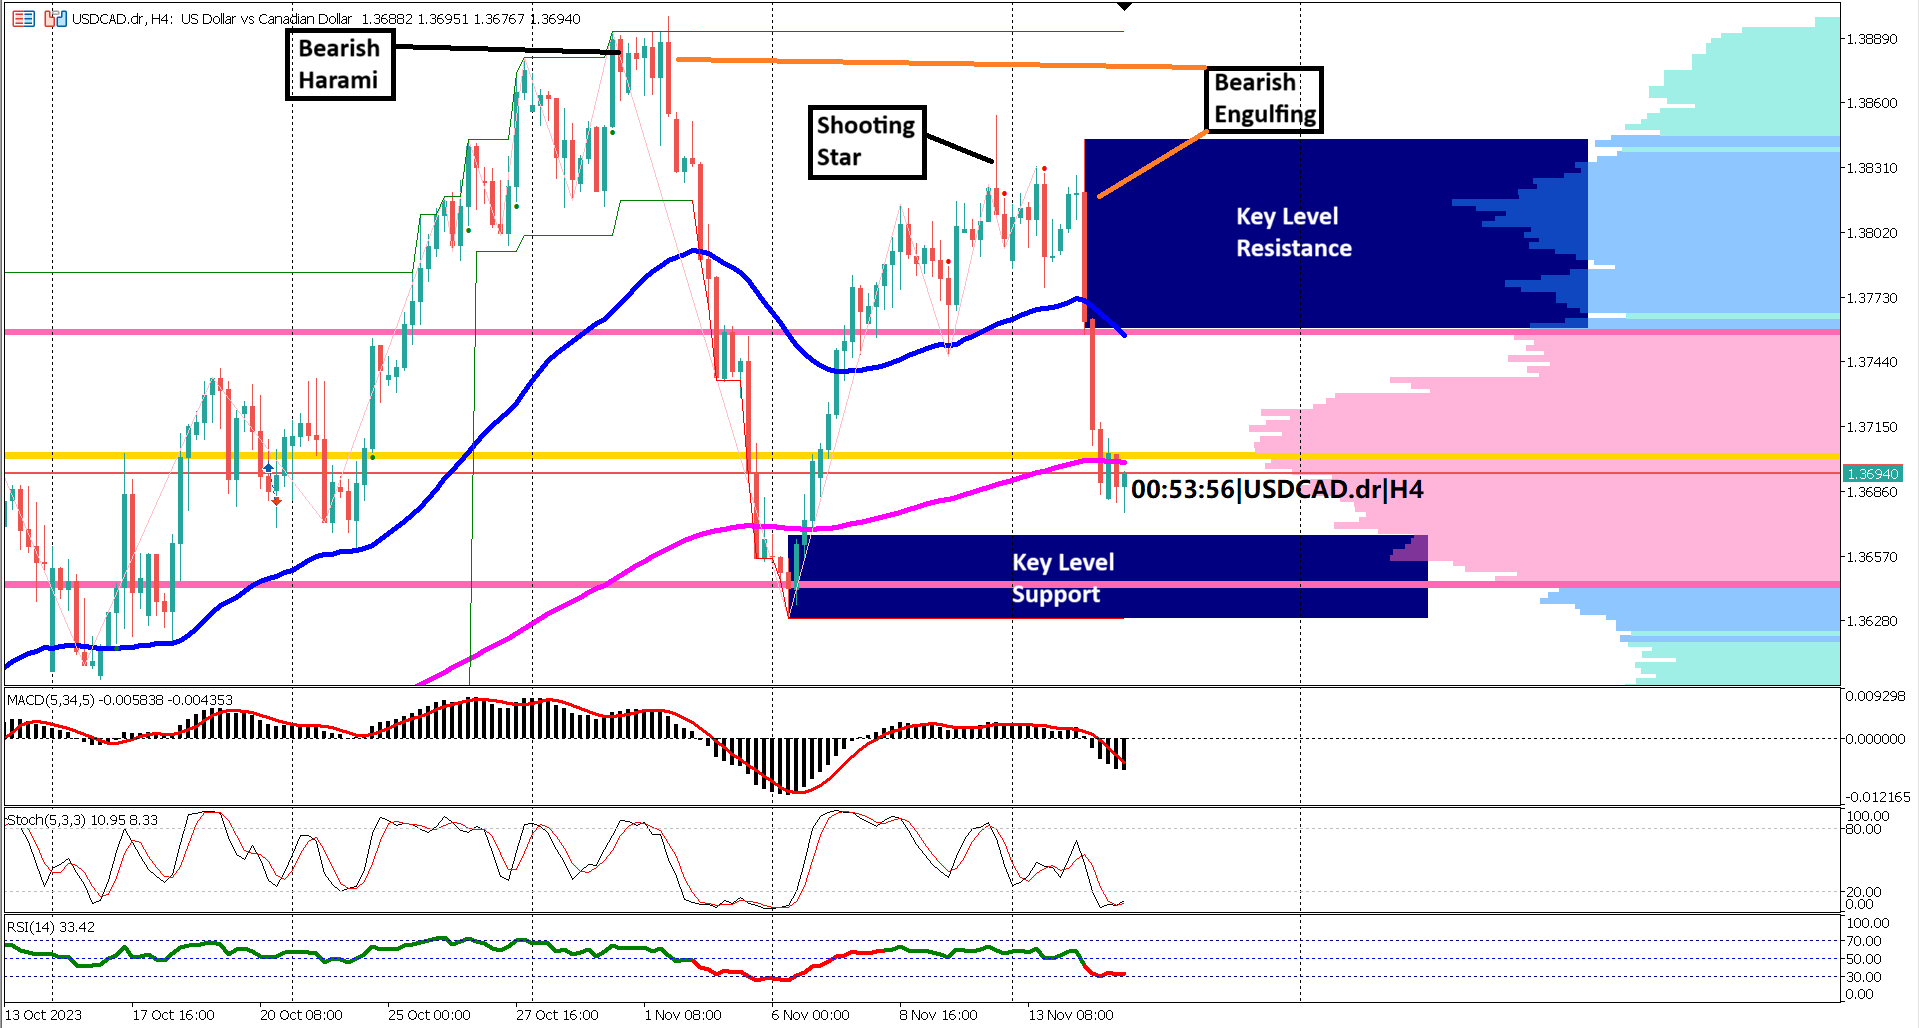 USDCAD Faces Extended Losses Amidst Crude Oil Influence and Bearish Candlestick Patterns